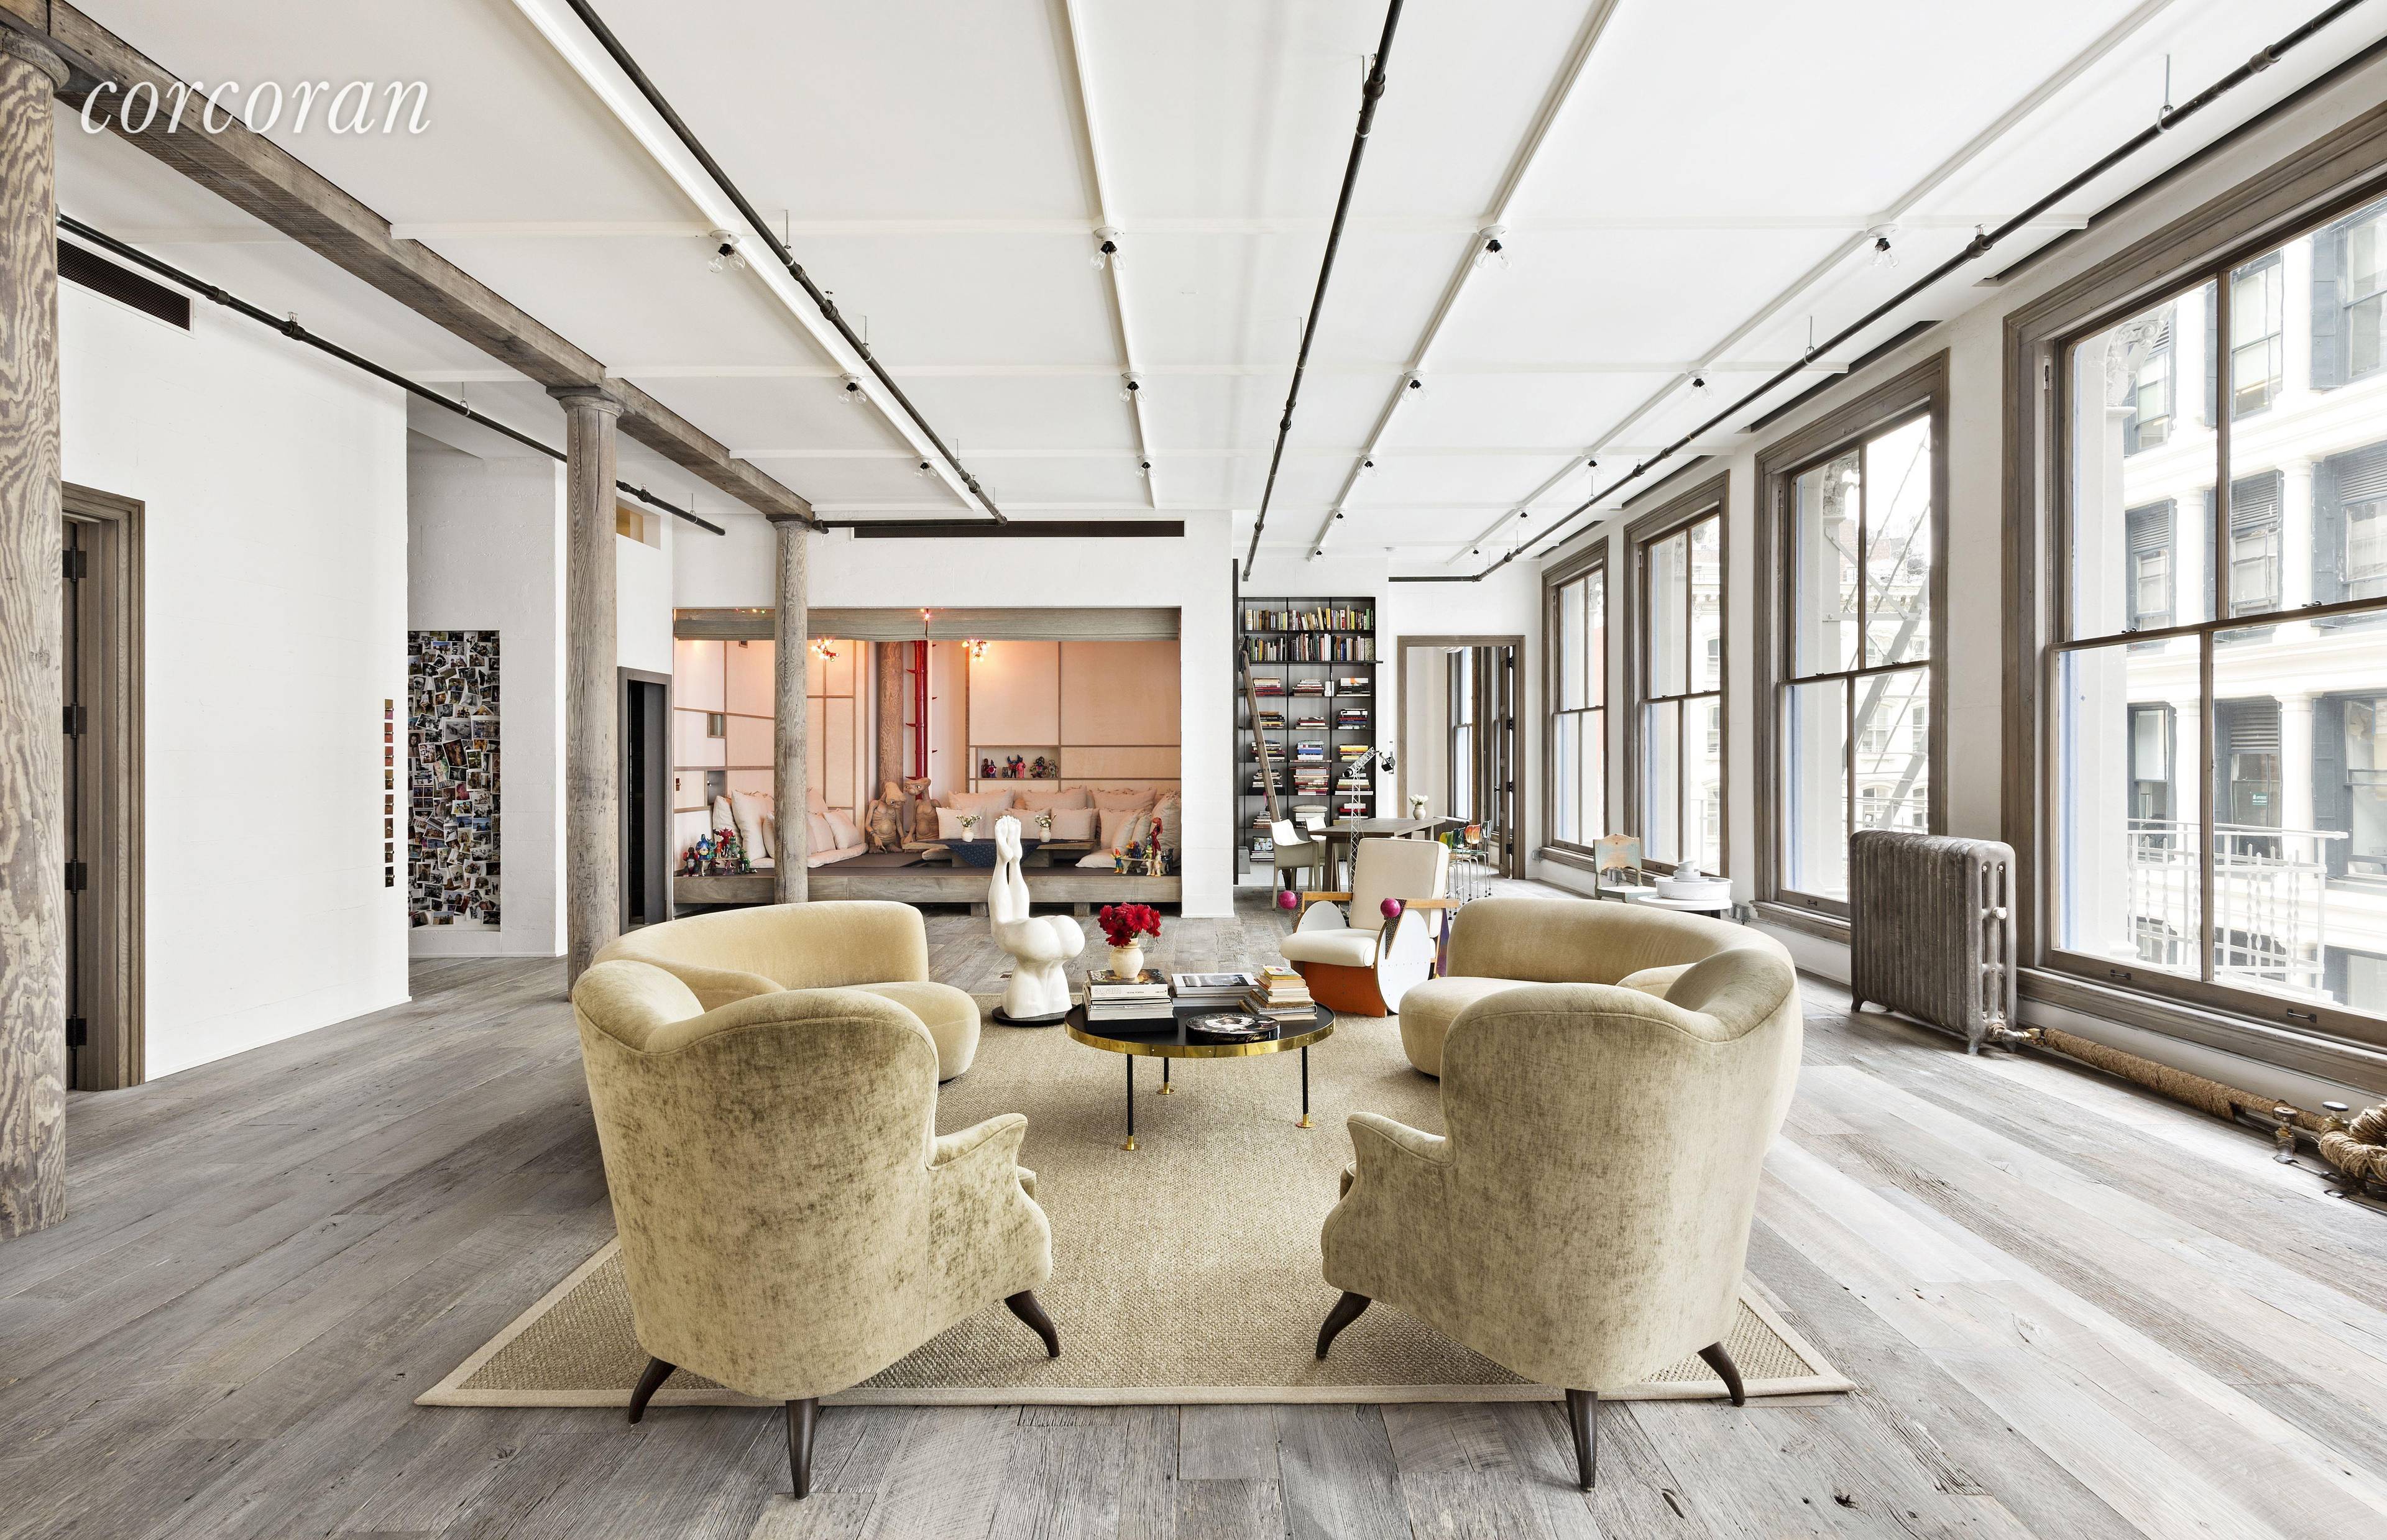 Architectural Digest features only a select number of New York City properties, but to make it to the magazines cover, it takes an apartment like no other.